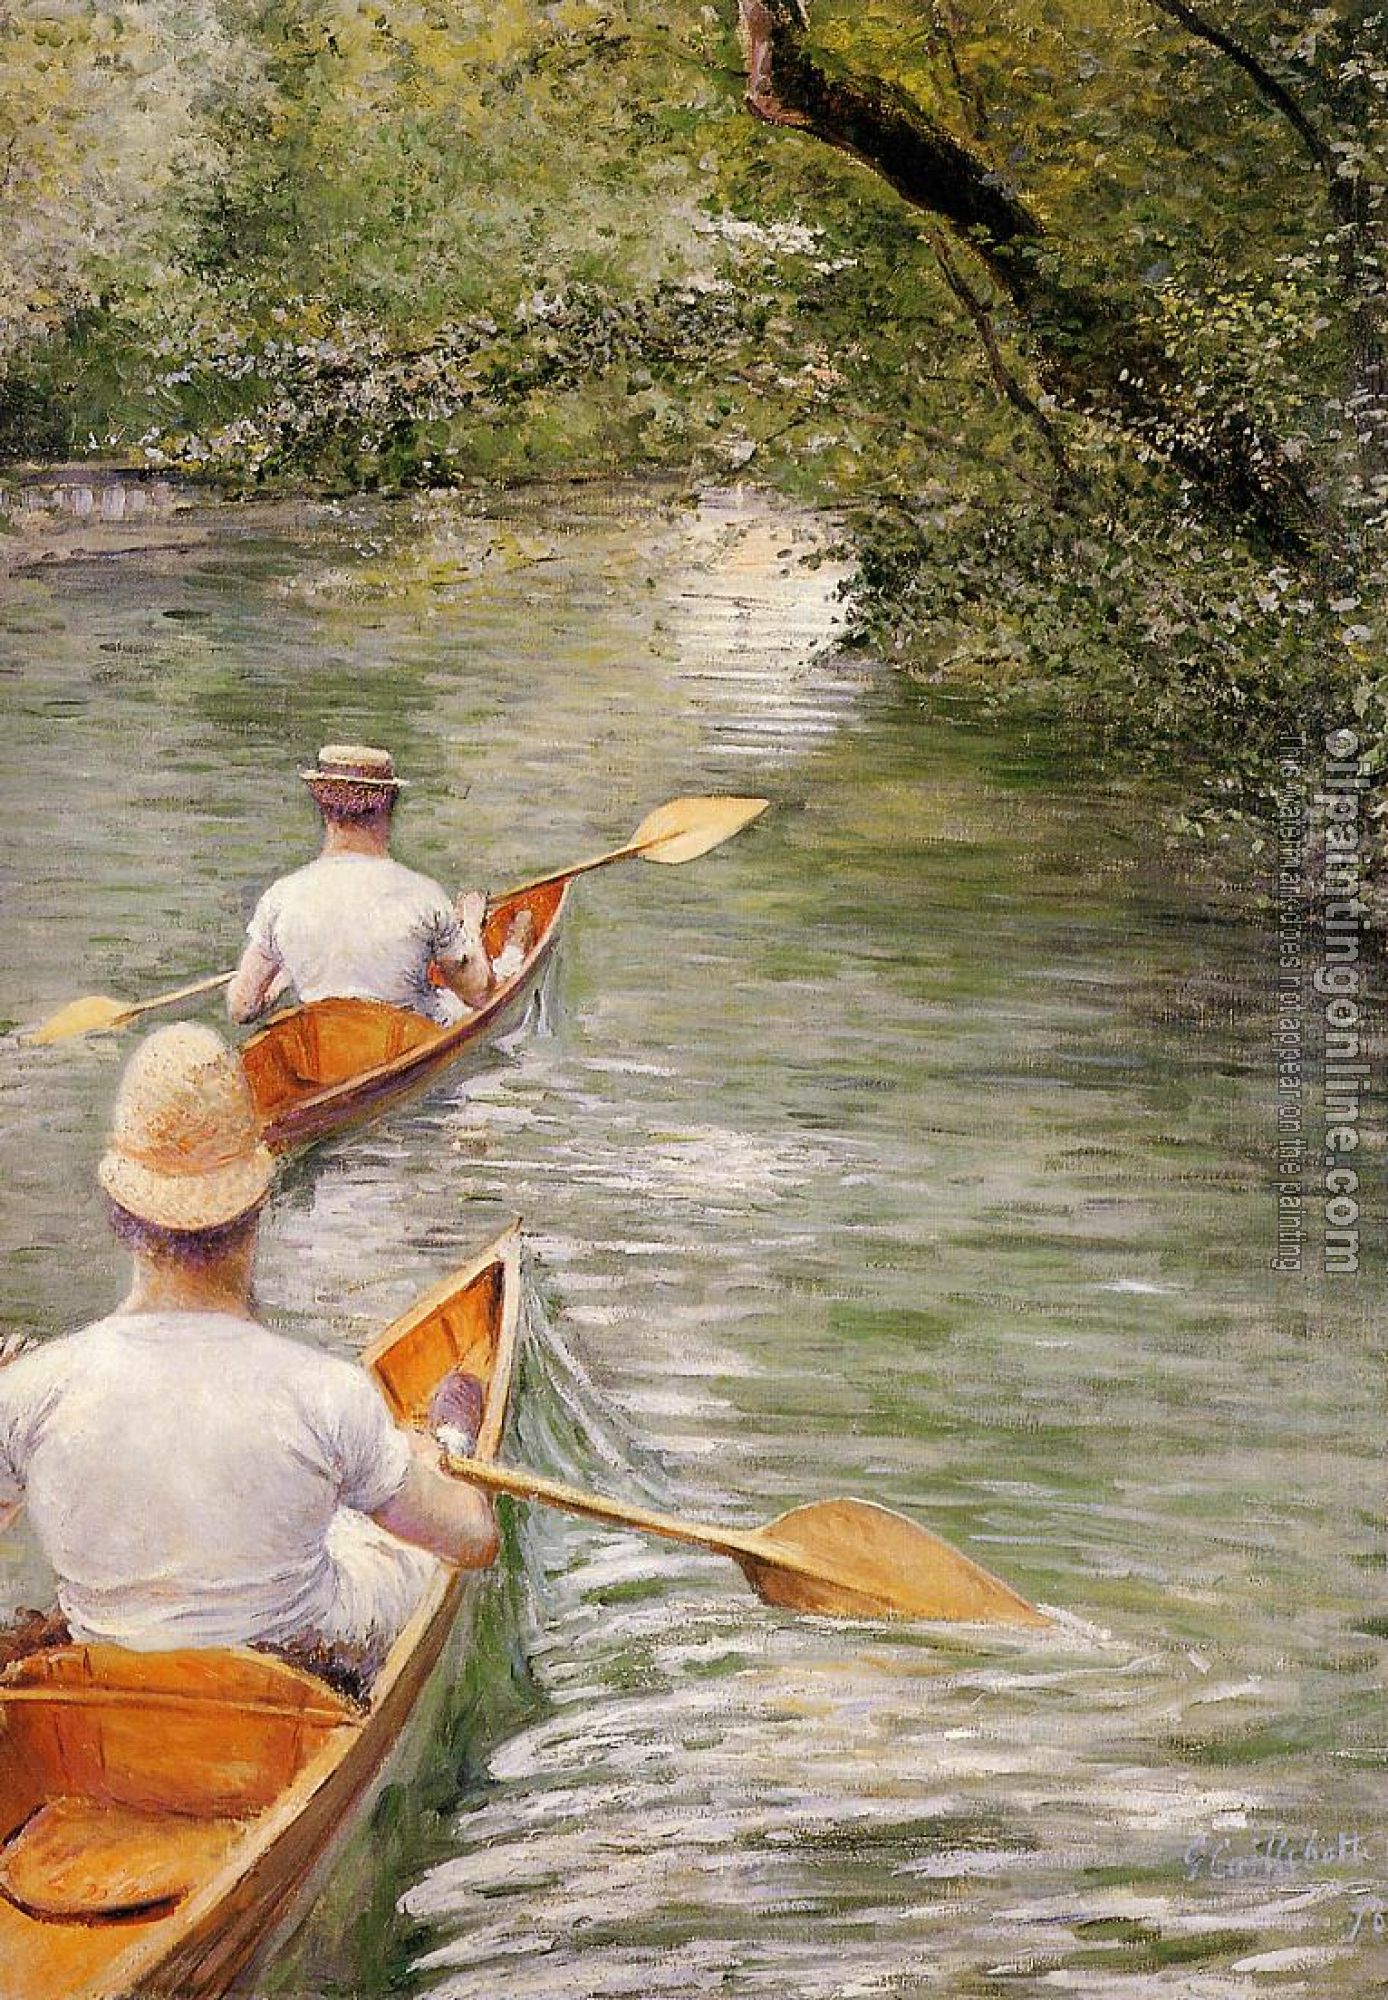 Gustave Caillebotte - Perissoires aka The Canoes